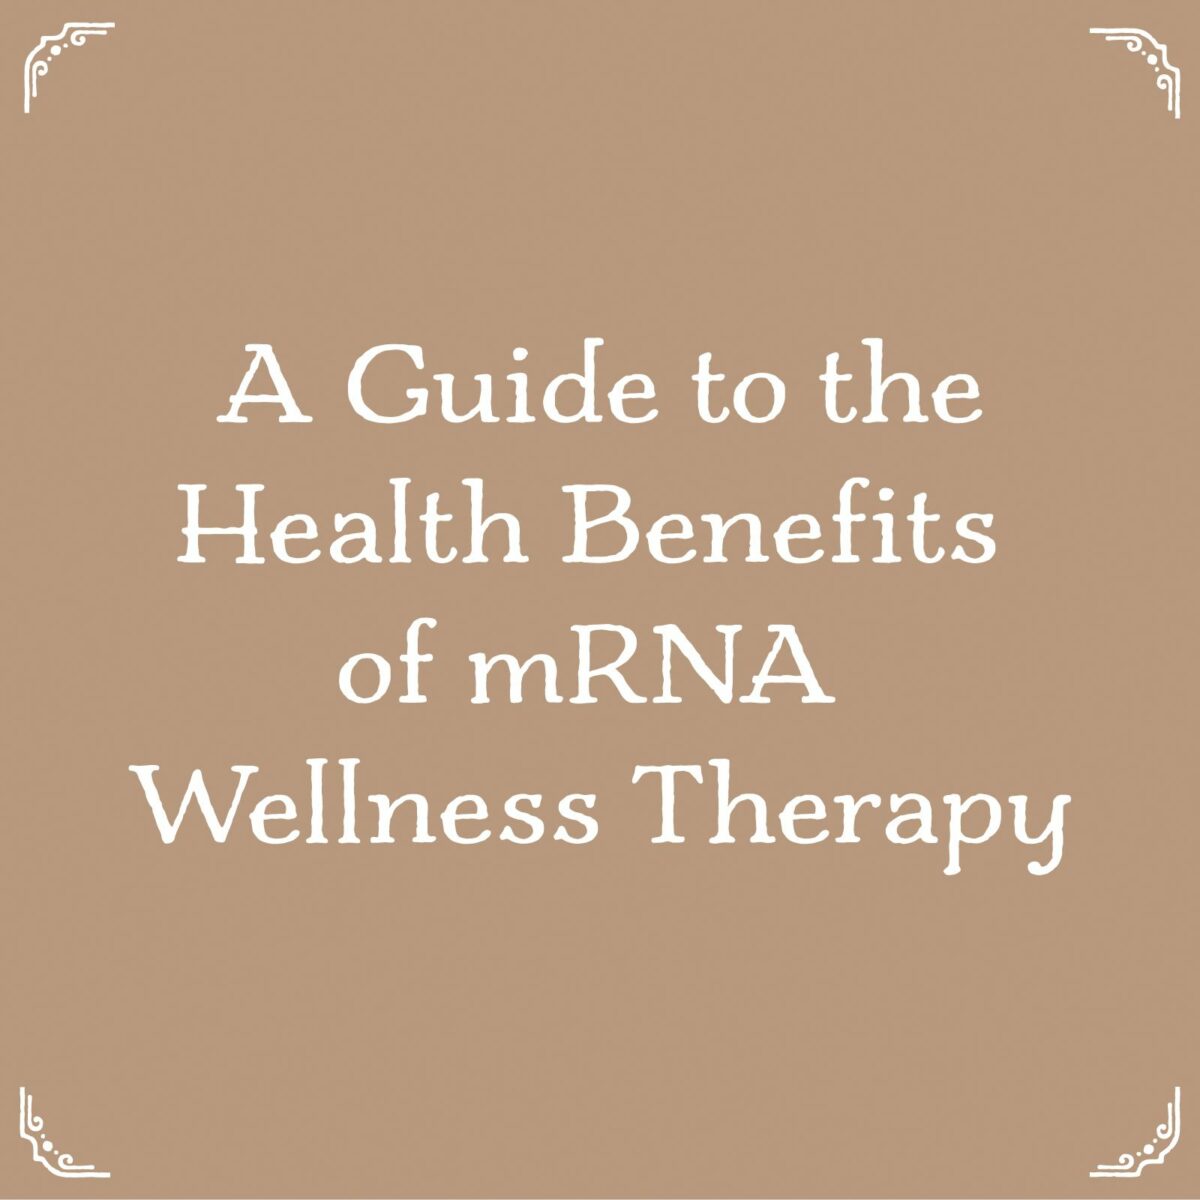 A Guide to mRNA Wellness Therapy